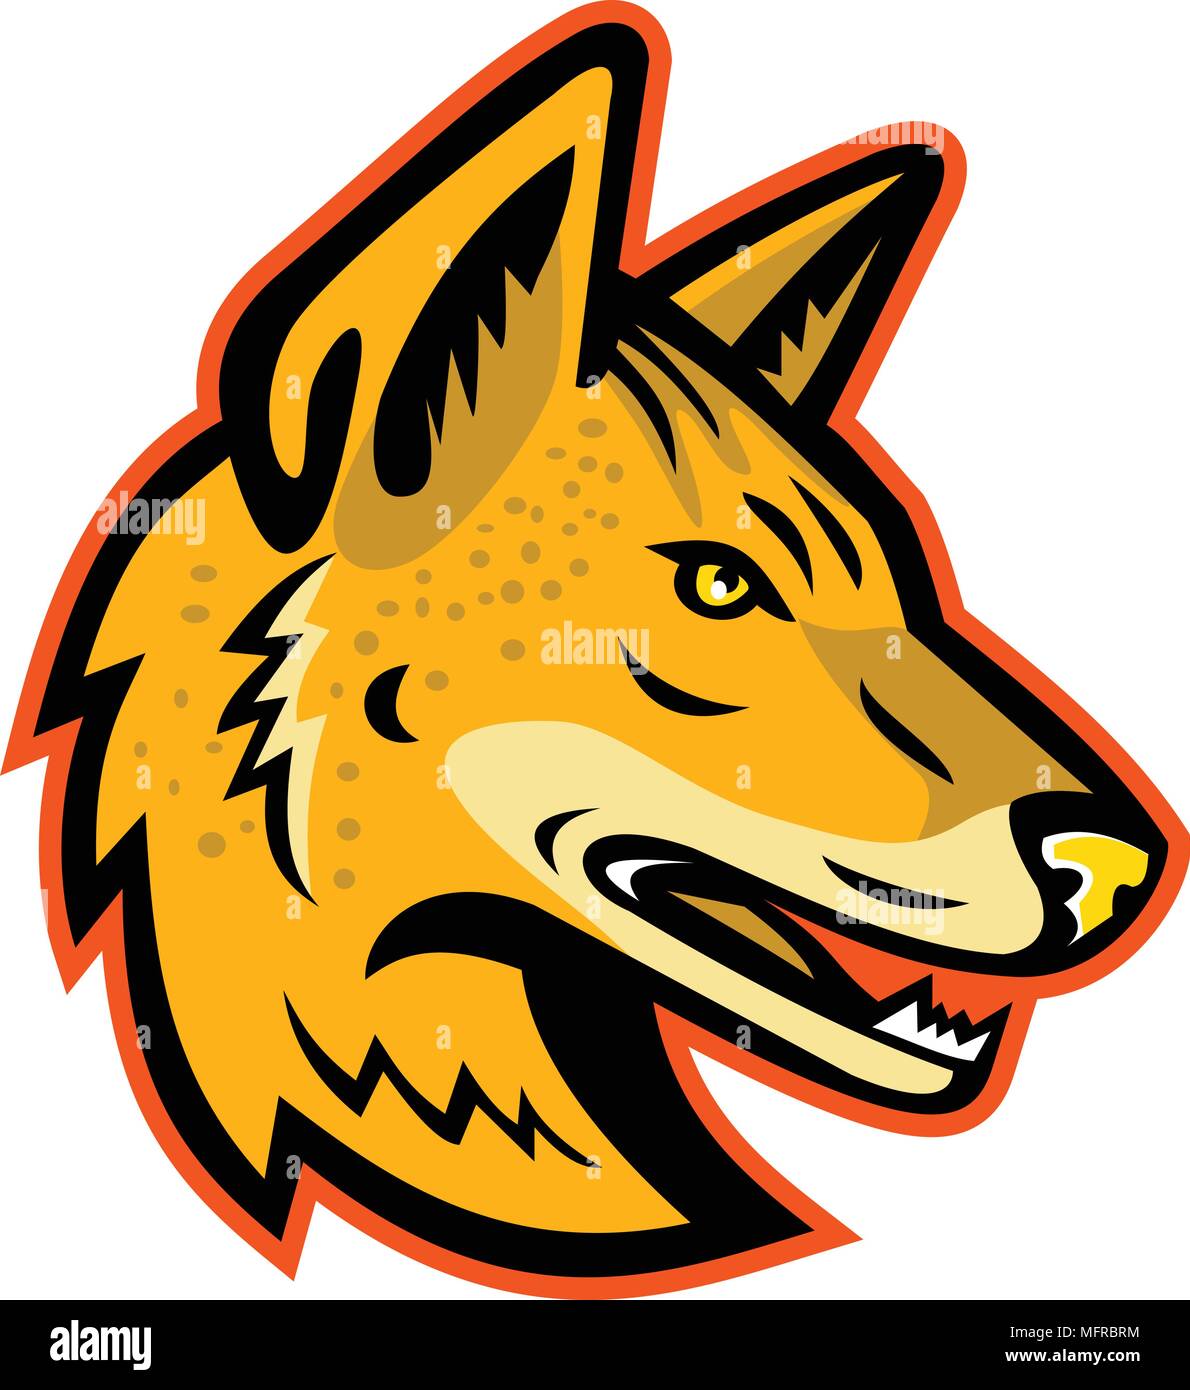 Mascot icon illustration of head of an Arabian wolf or Canis lupus arabs, a subspecies of gray wolf viewed from side on isolated background in retro s Stock Vector